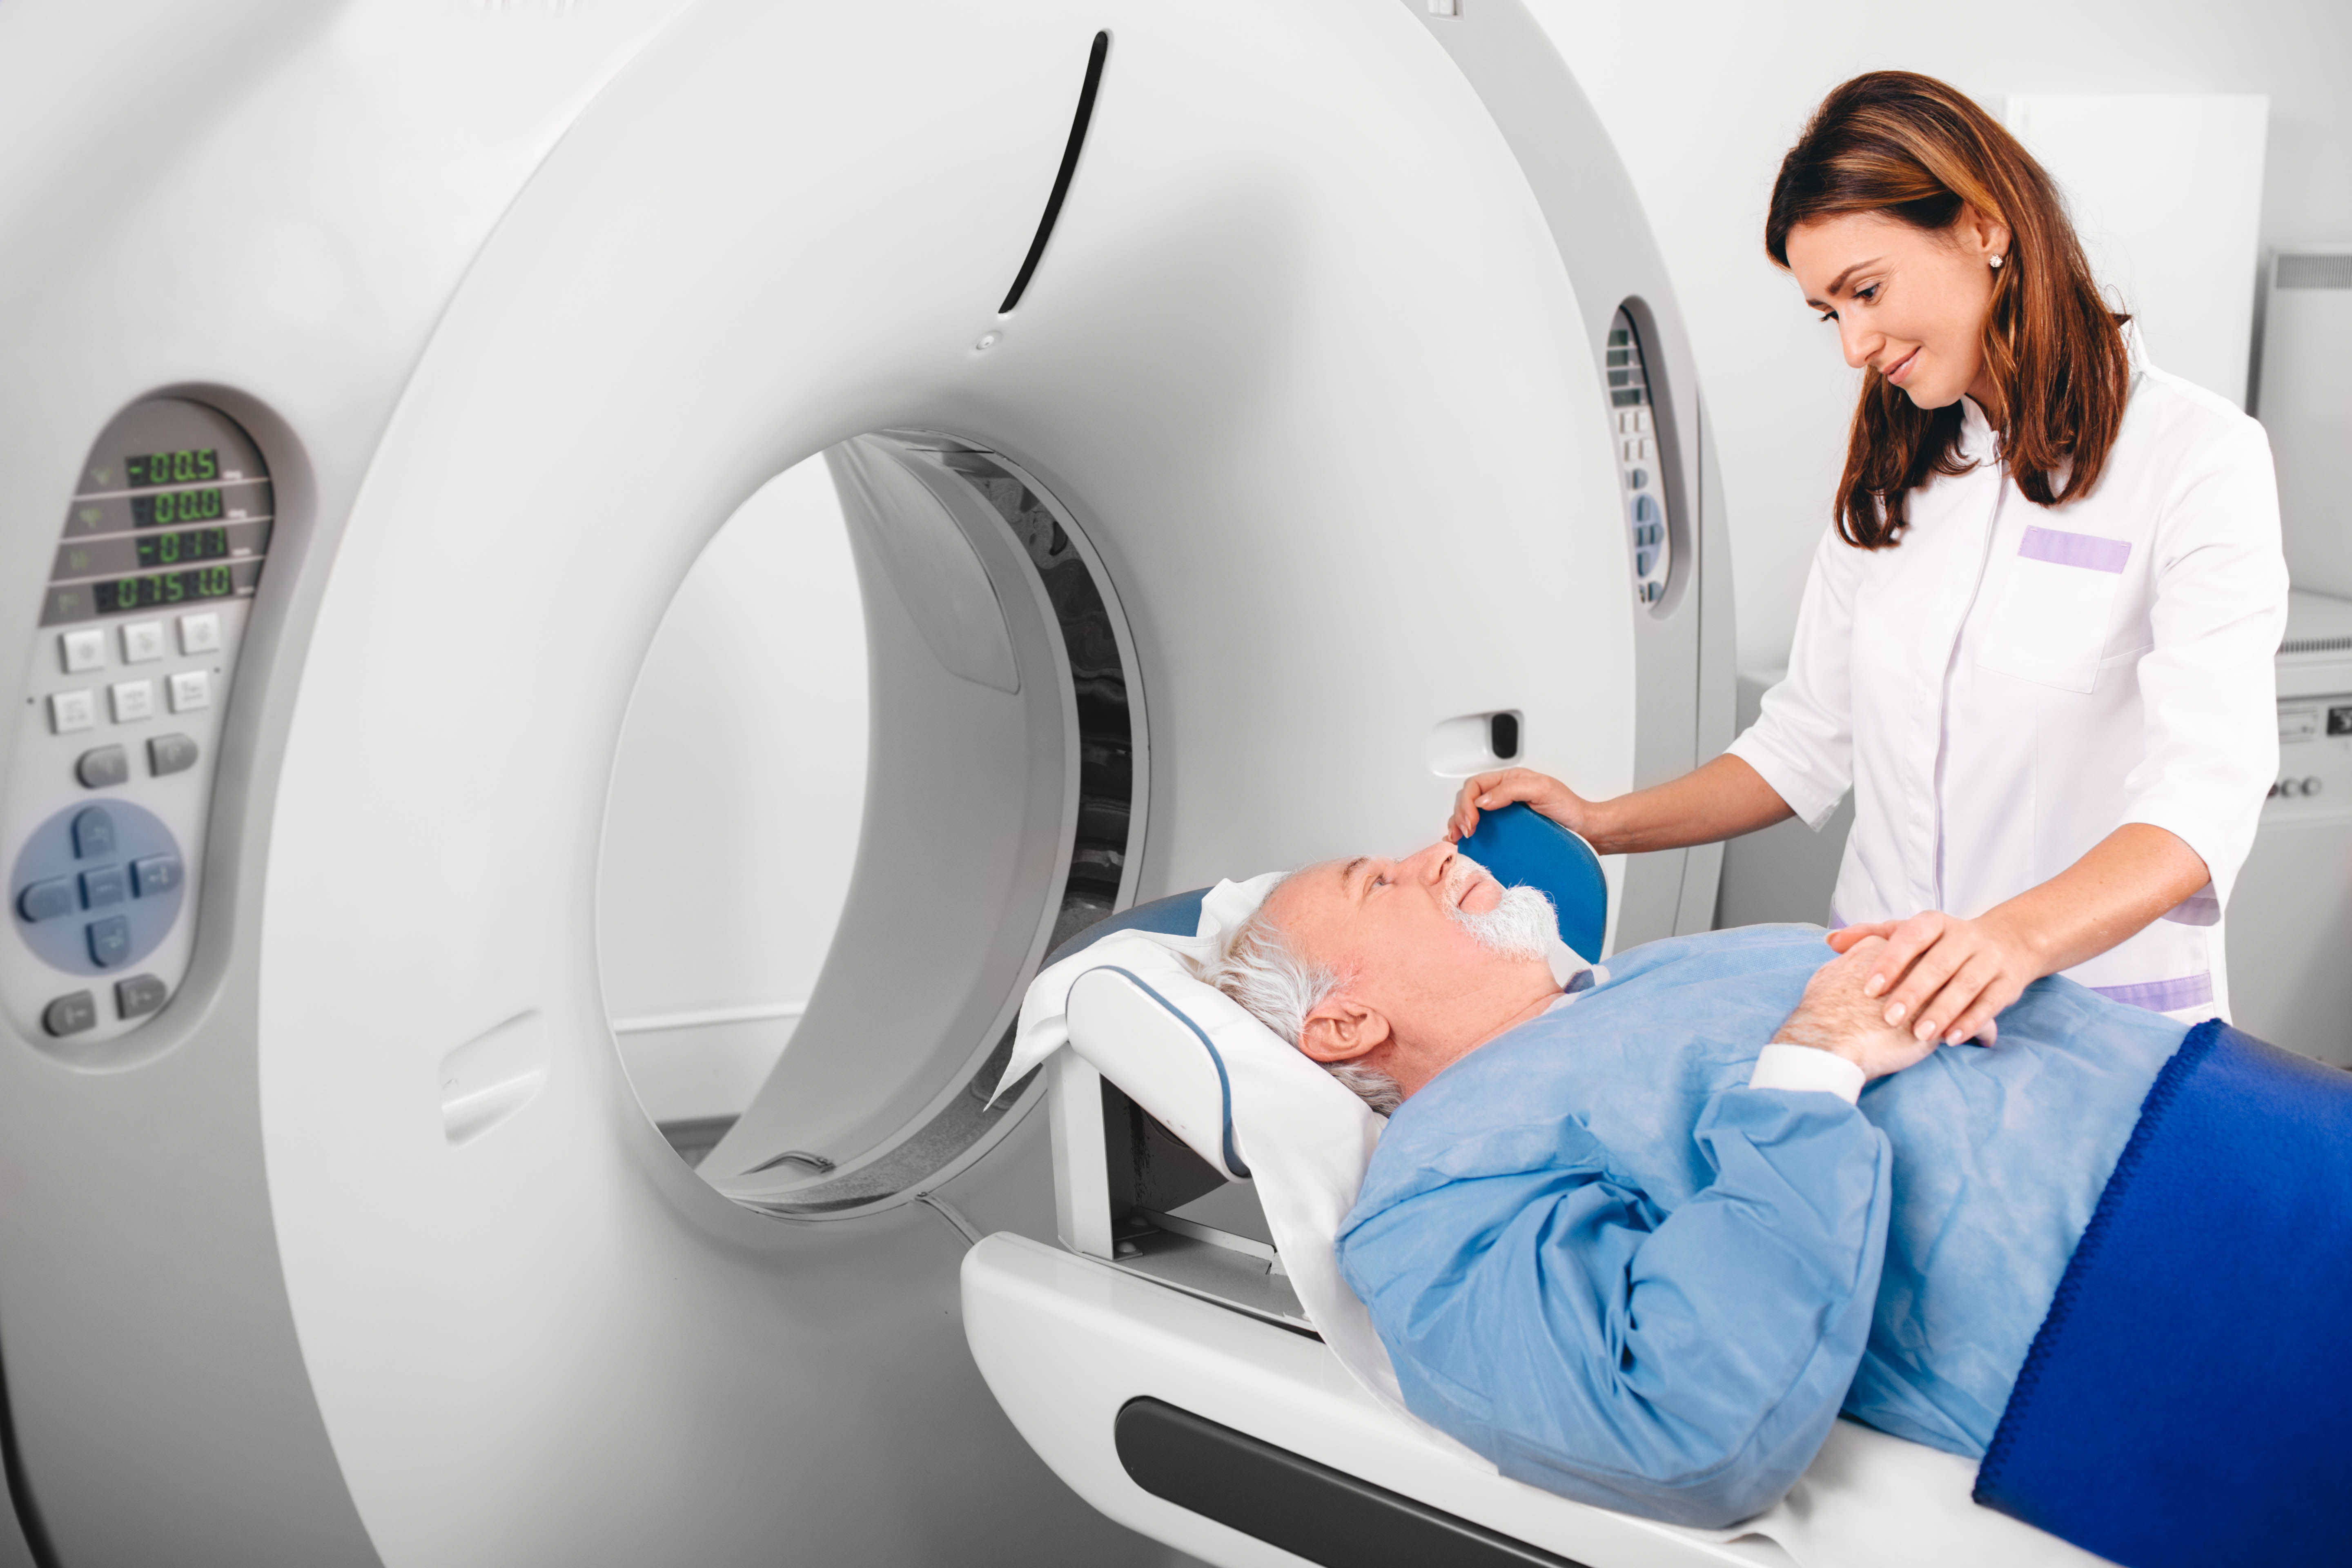 Why You Should Go to the Best Medical Imaging Center in Your Area for CT Scans